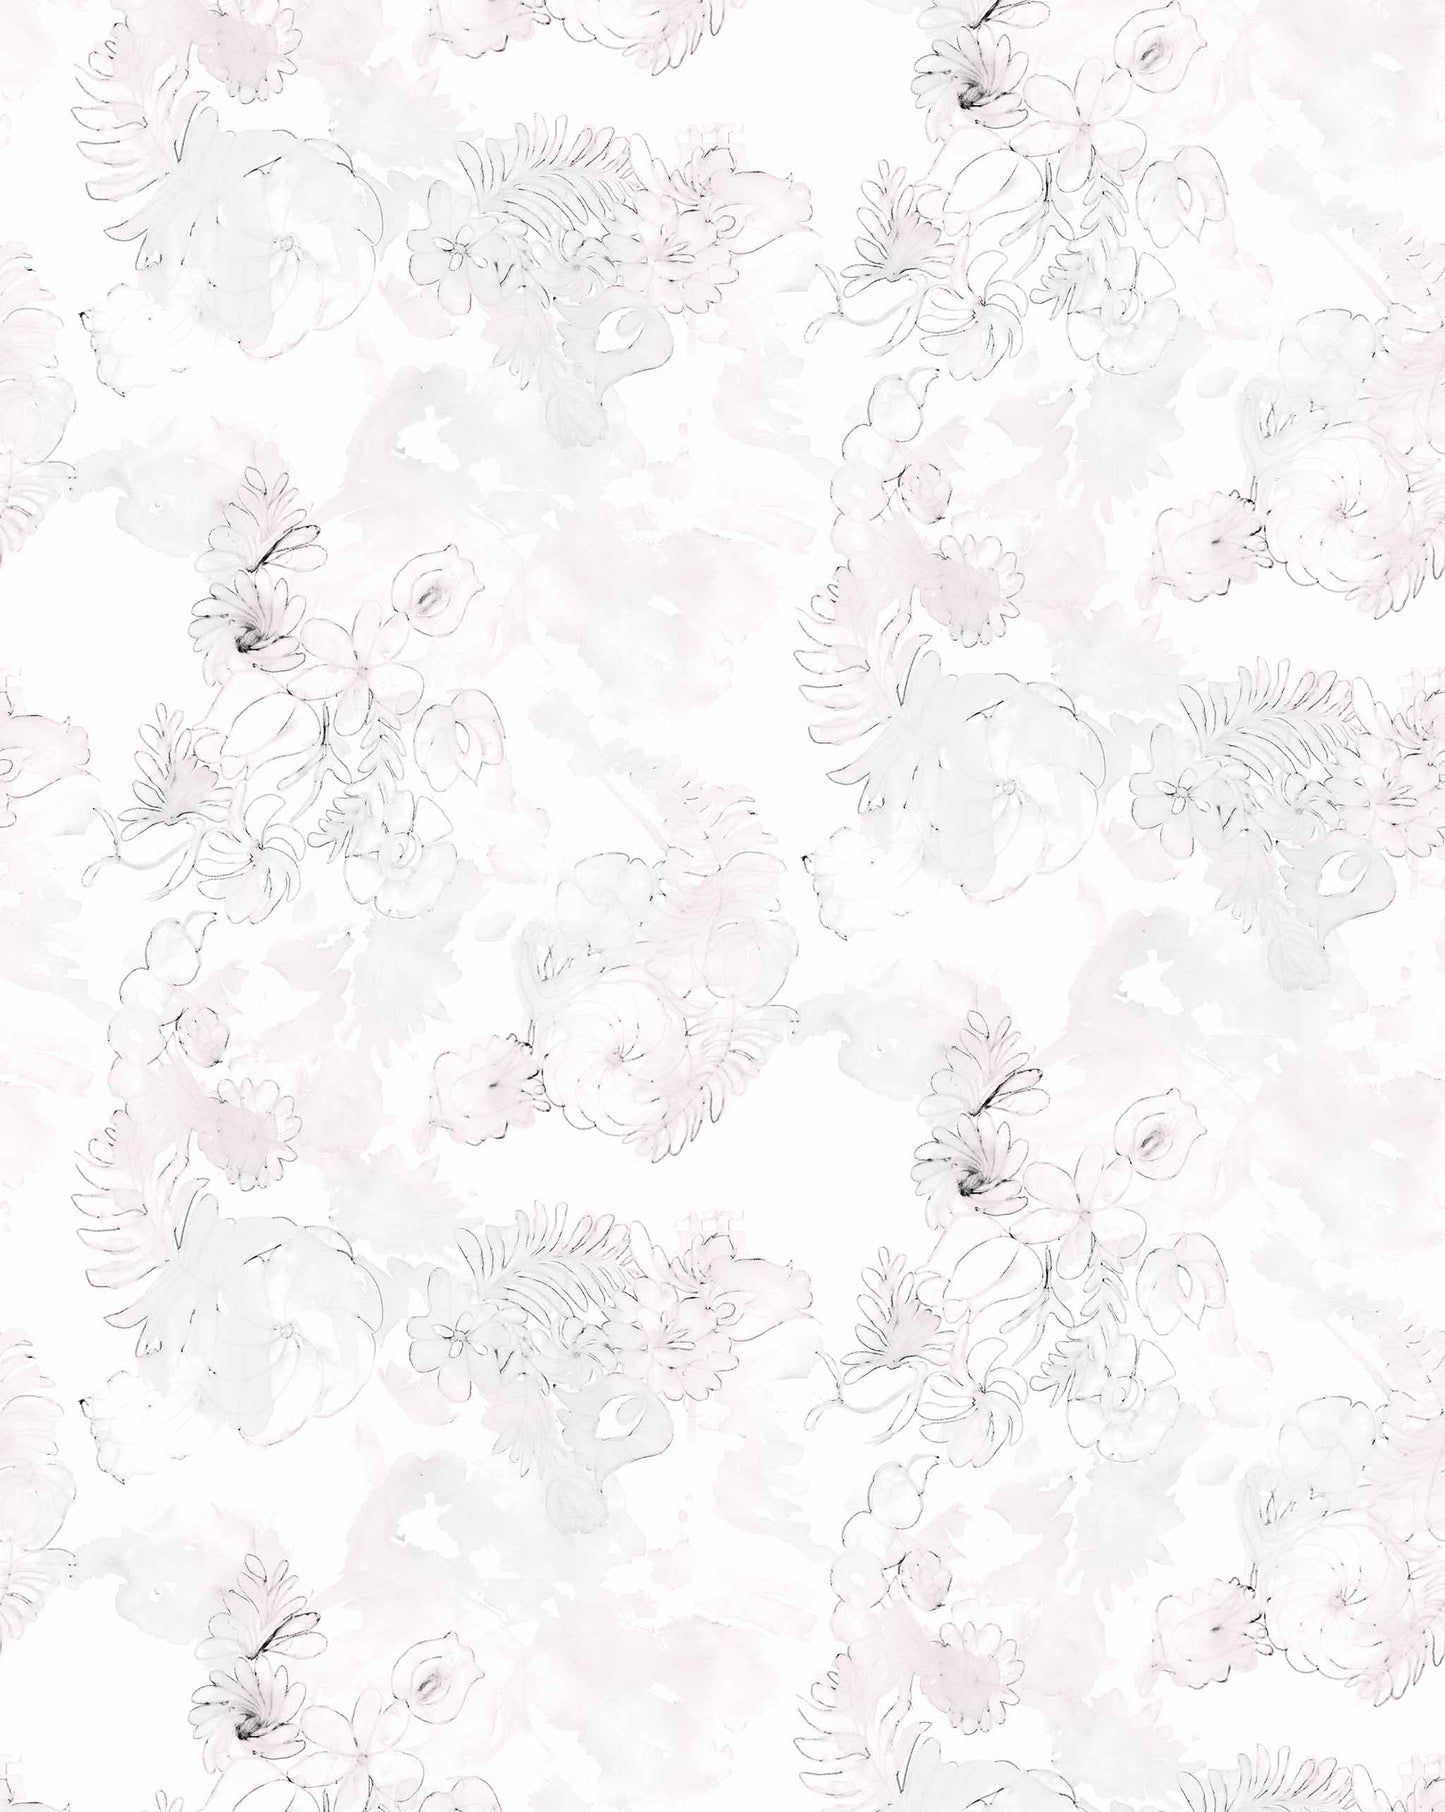 Seamless floral pattern with soft pink Belize Blooms Wallpaper Mural on a white background.